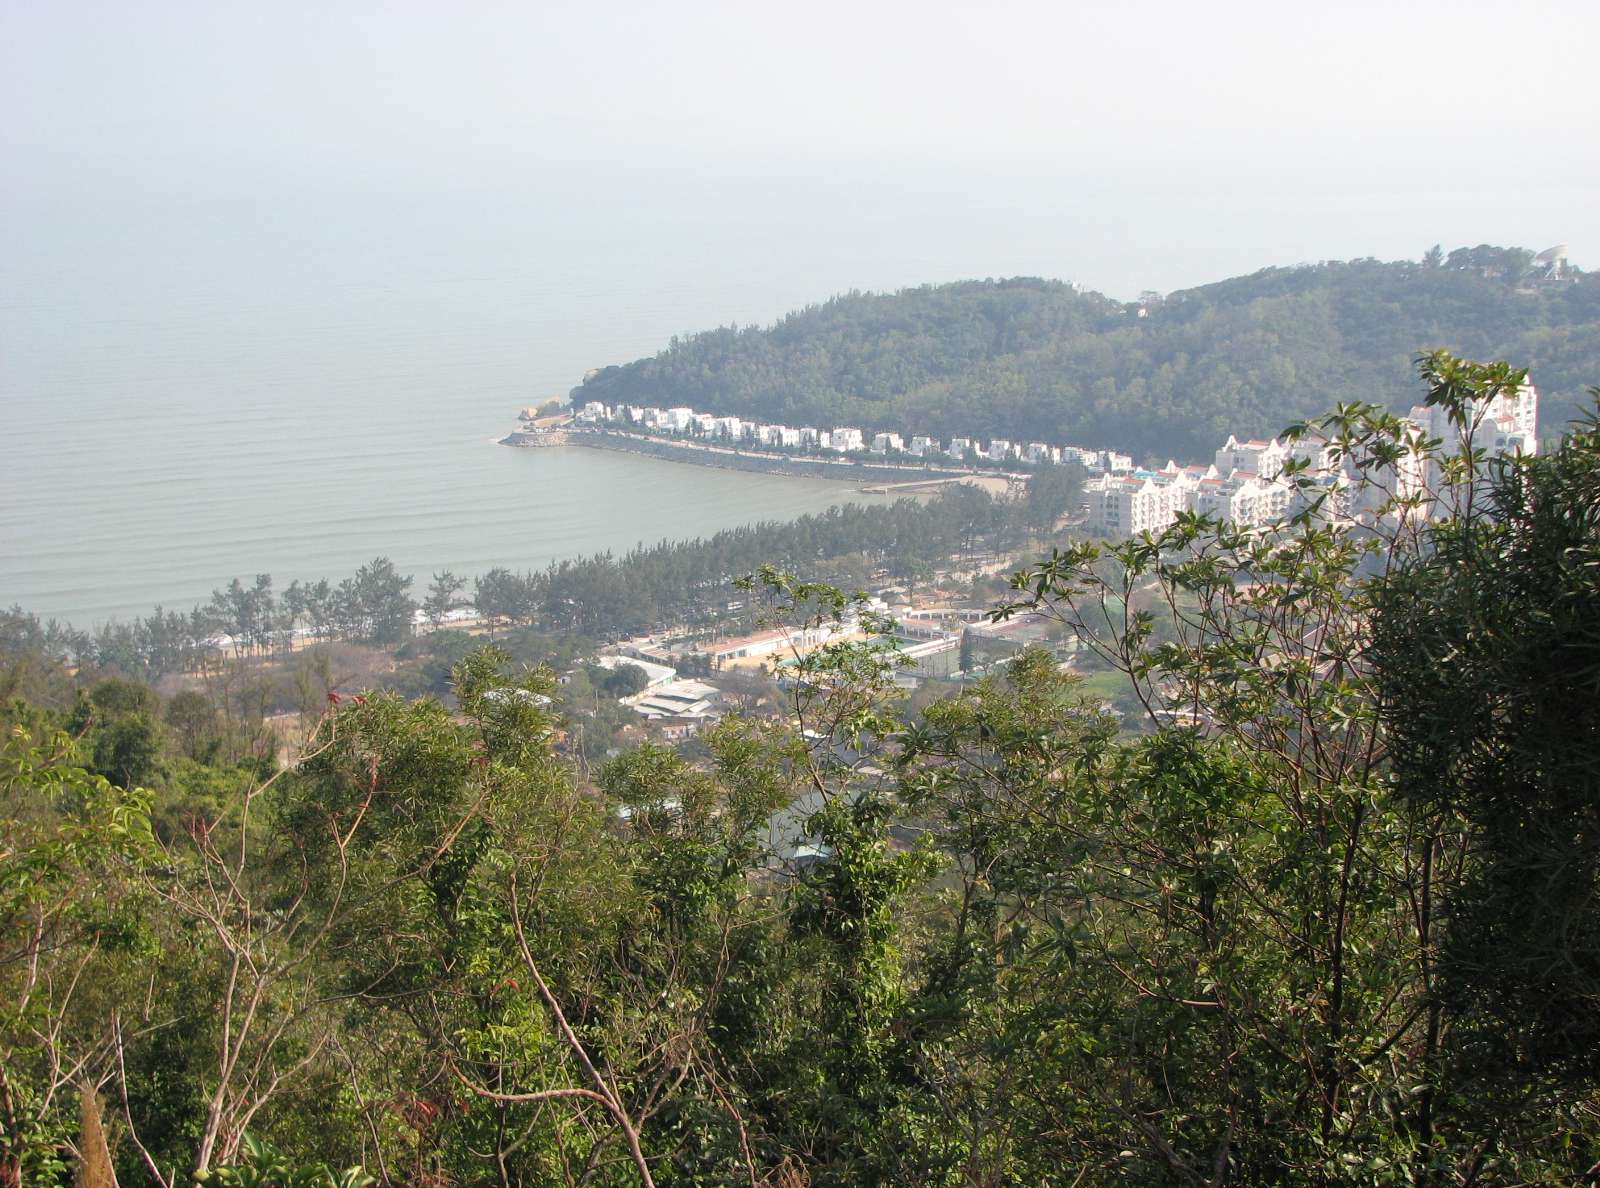 The Coloane hiking trail offers memorable views of the Pearl River Estuary, and can be a retreat from Macau’s casino crowds. Photo: Pete Spurrier